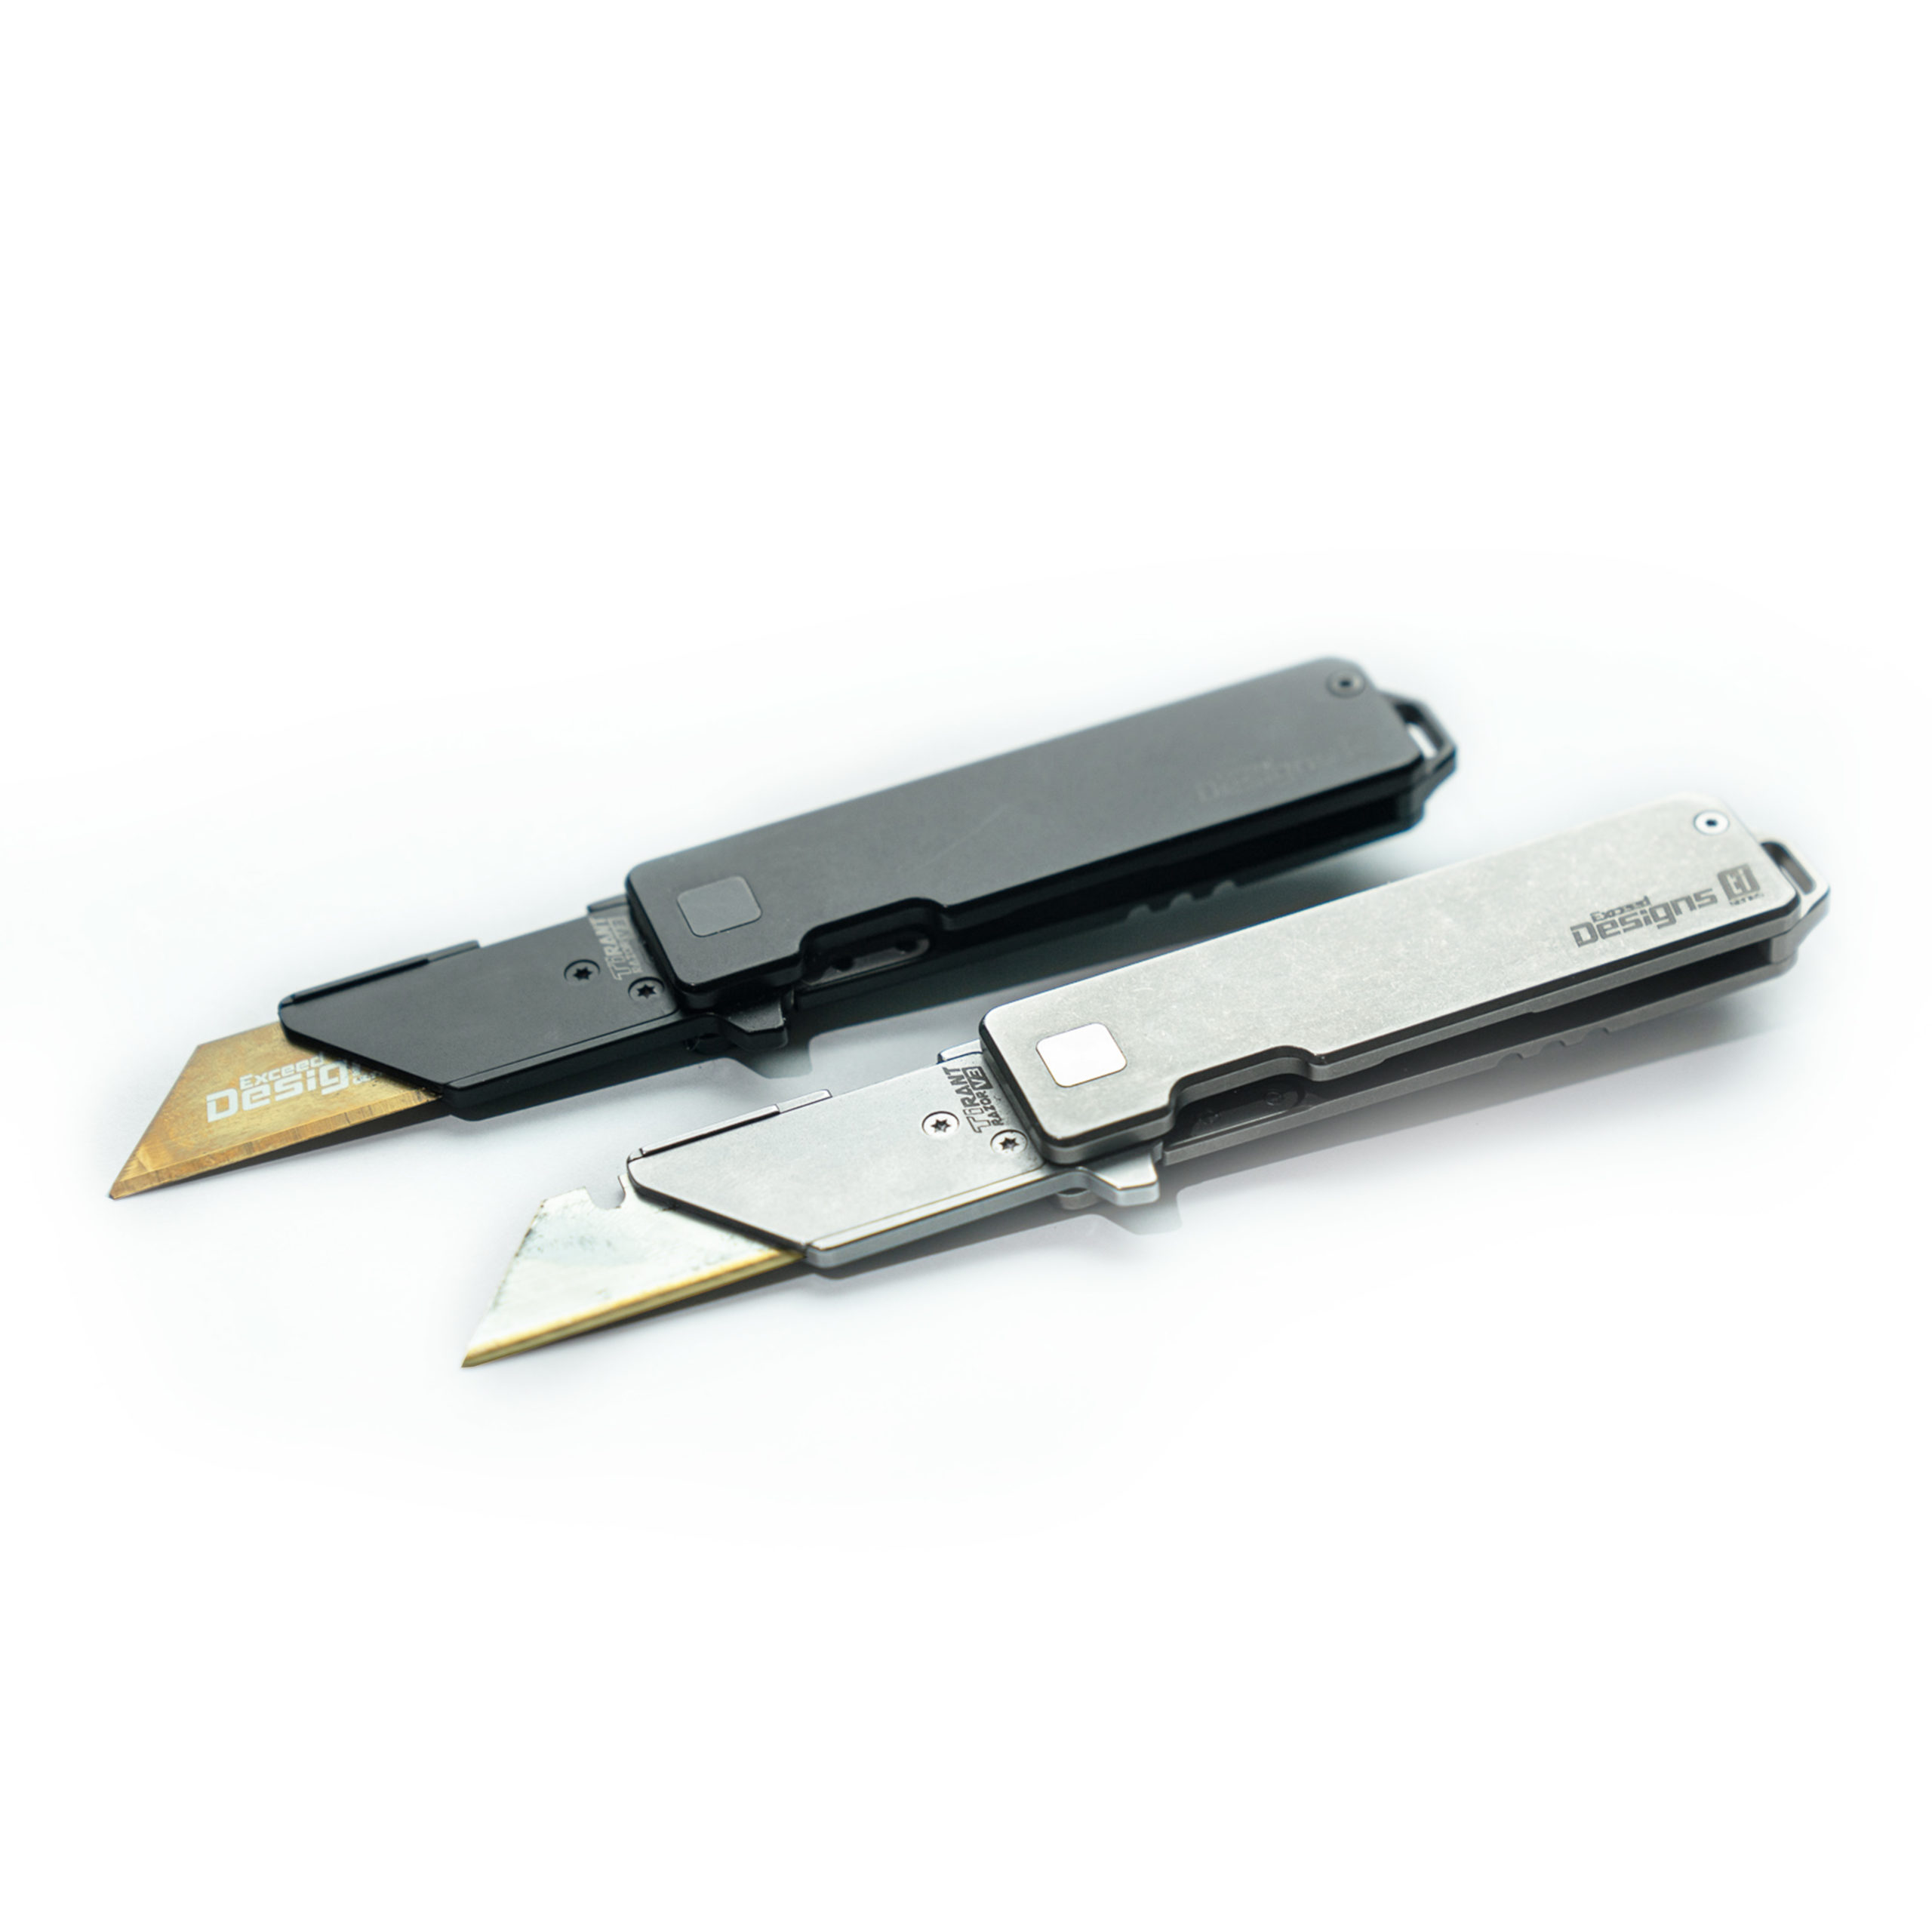 Titanium Utility Mini Knife, Small Box Cutter with Retractable and